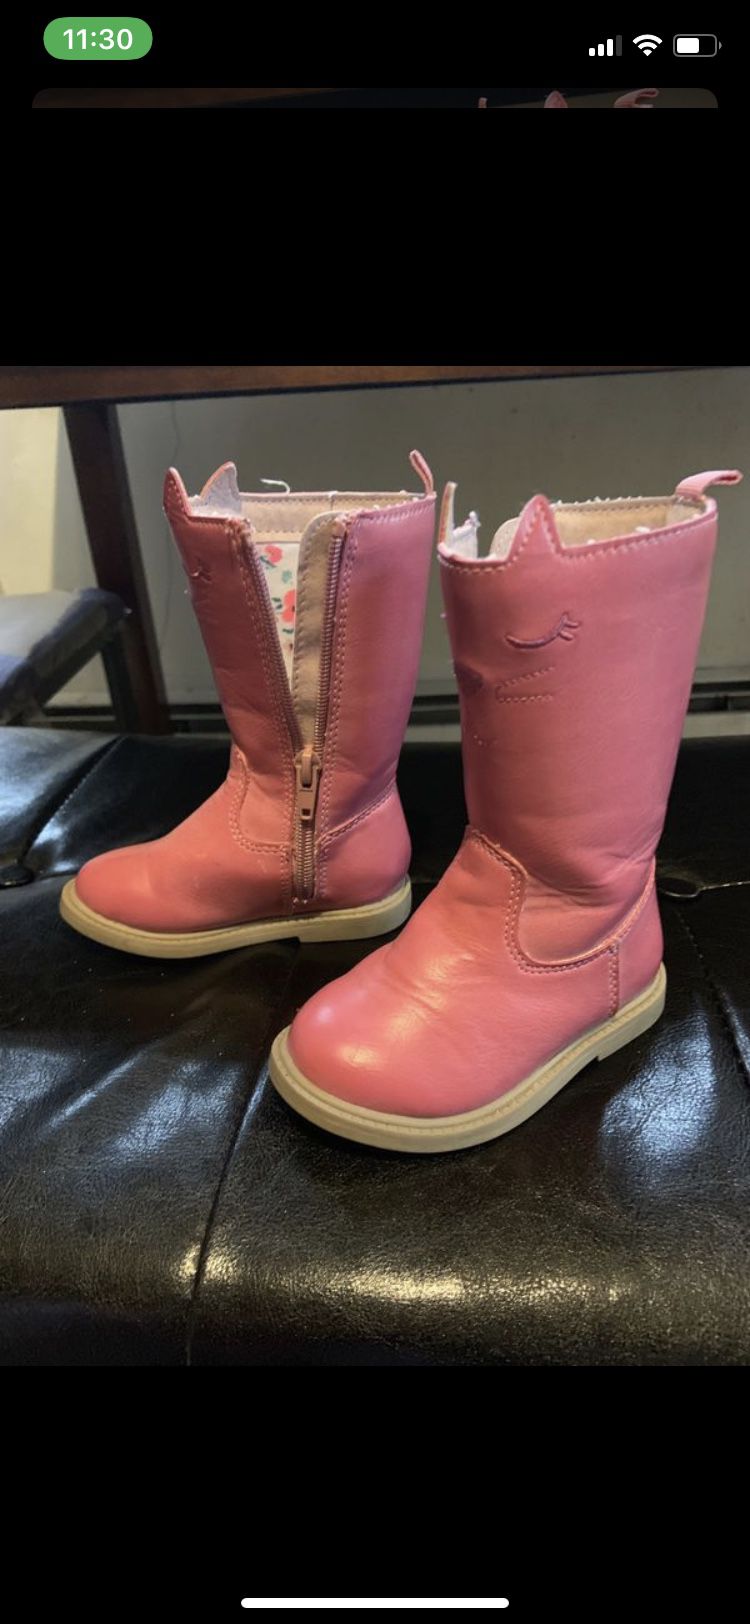 Little girls boots US size 5 in great condition.